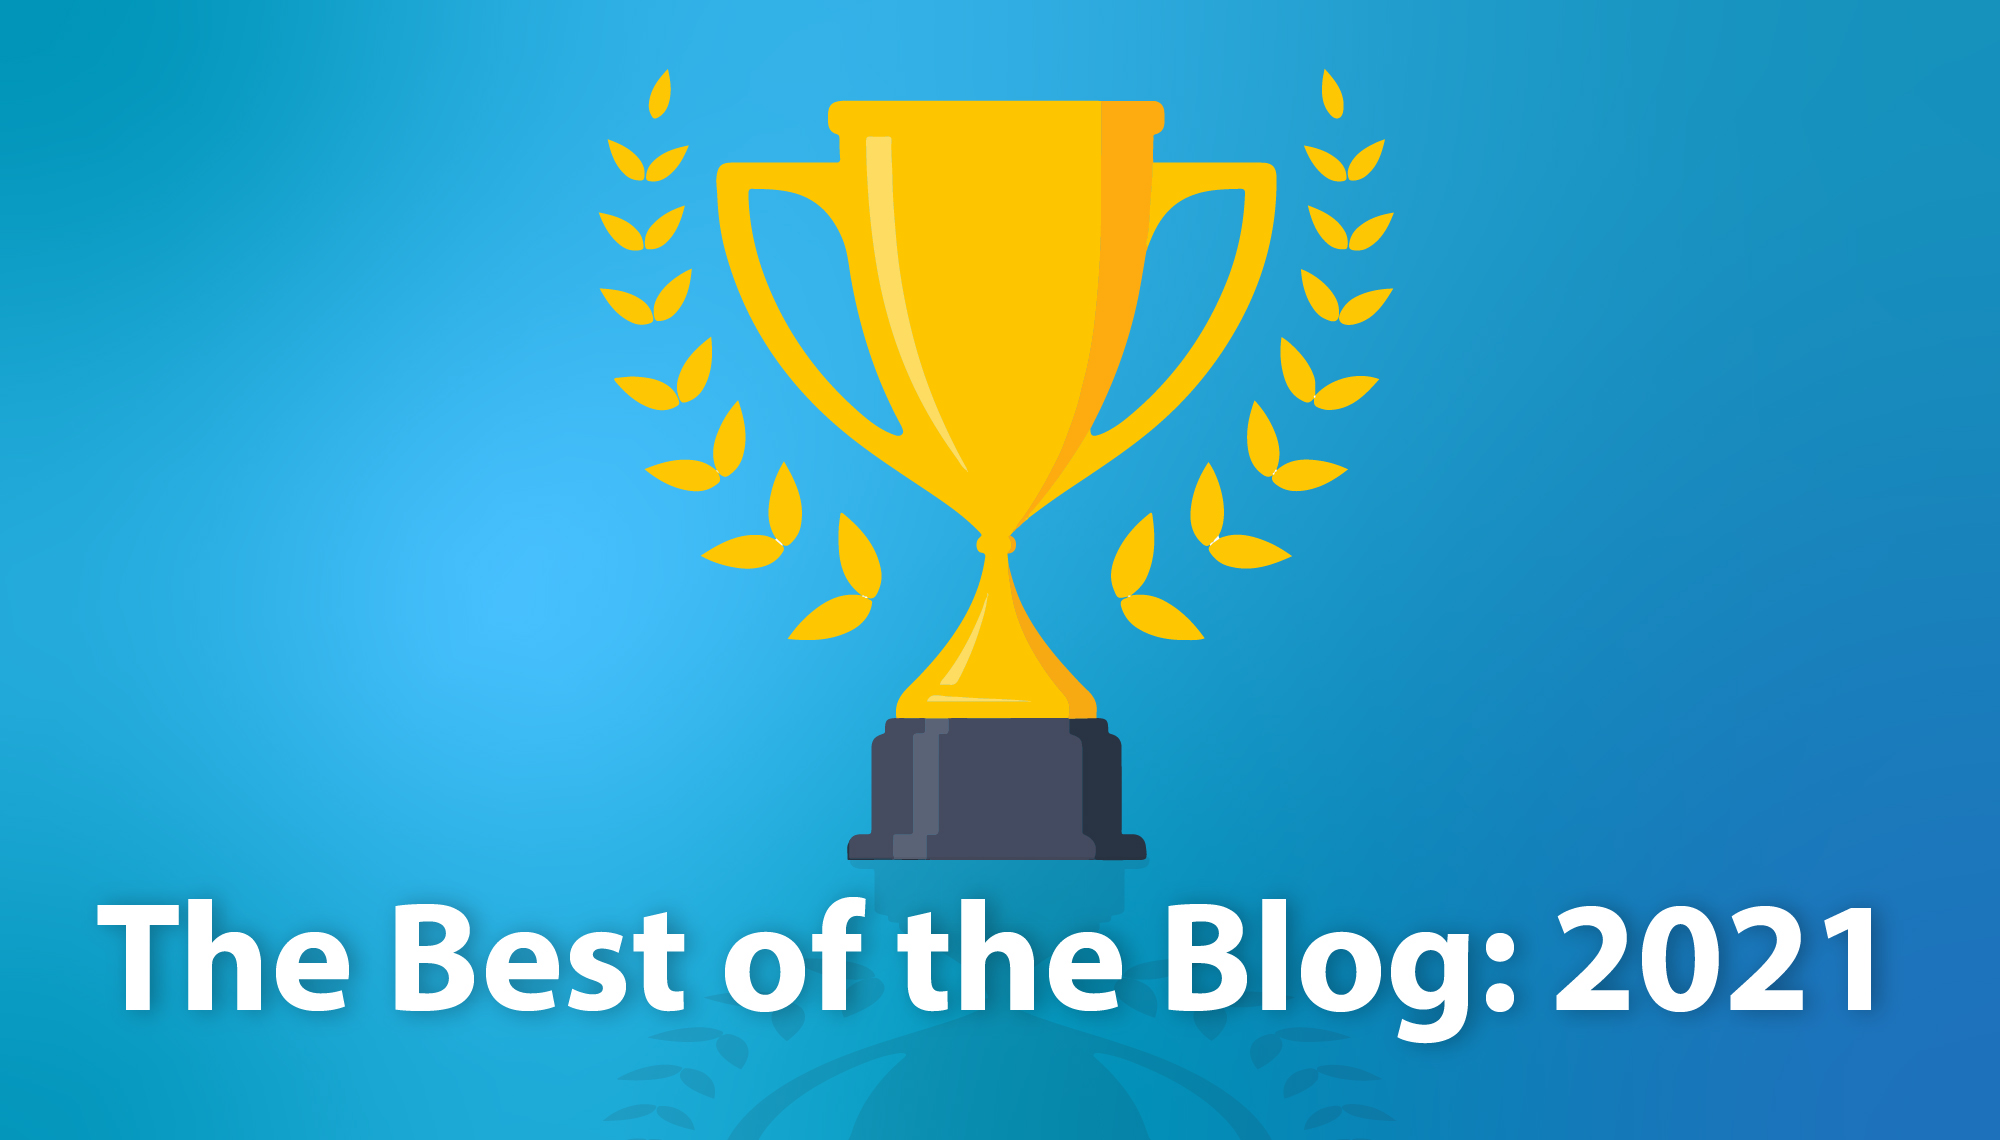 Read the blog The Best of the Blog: 2021